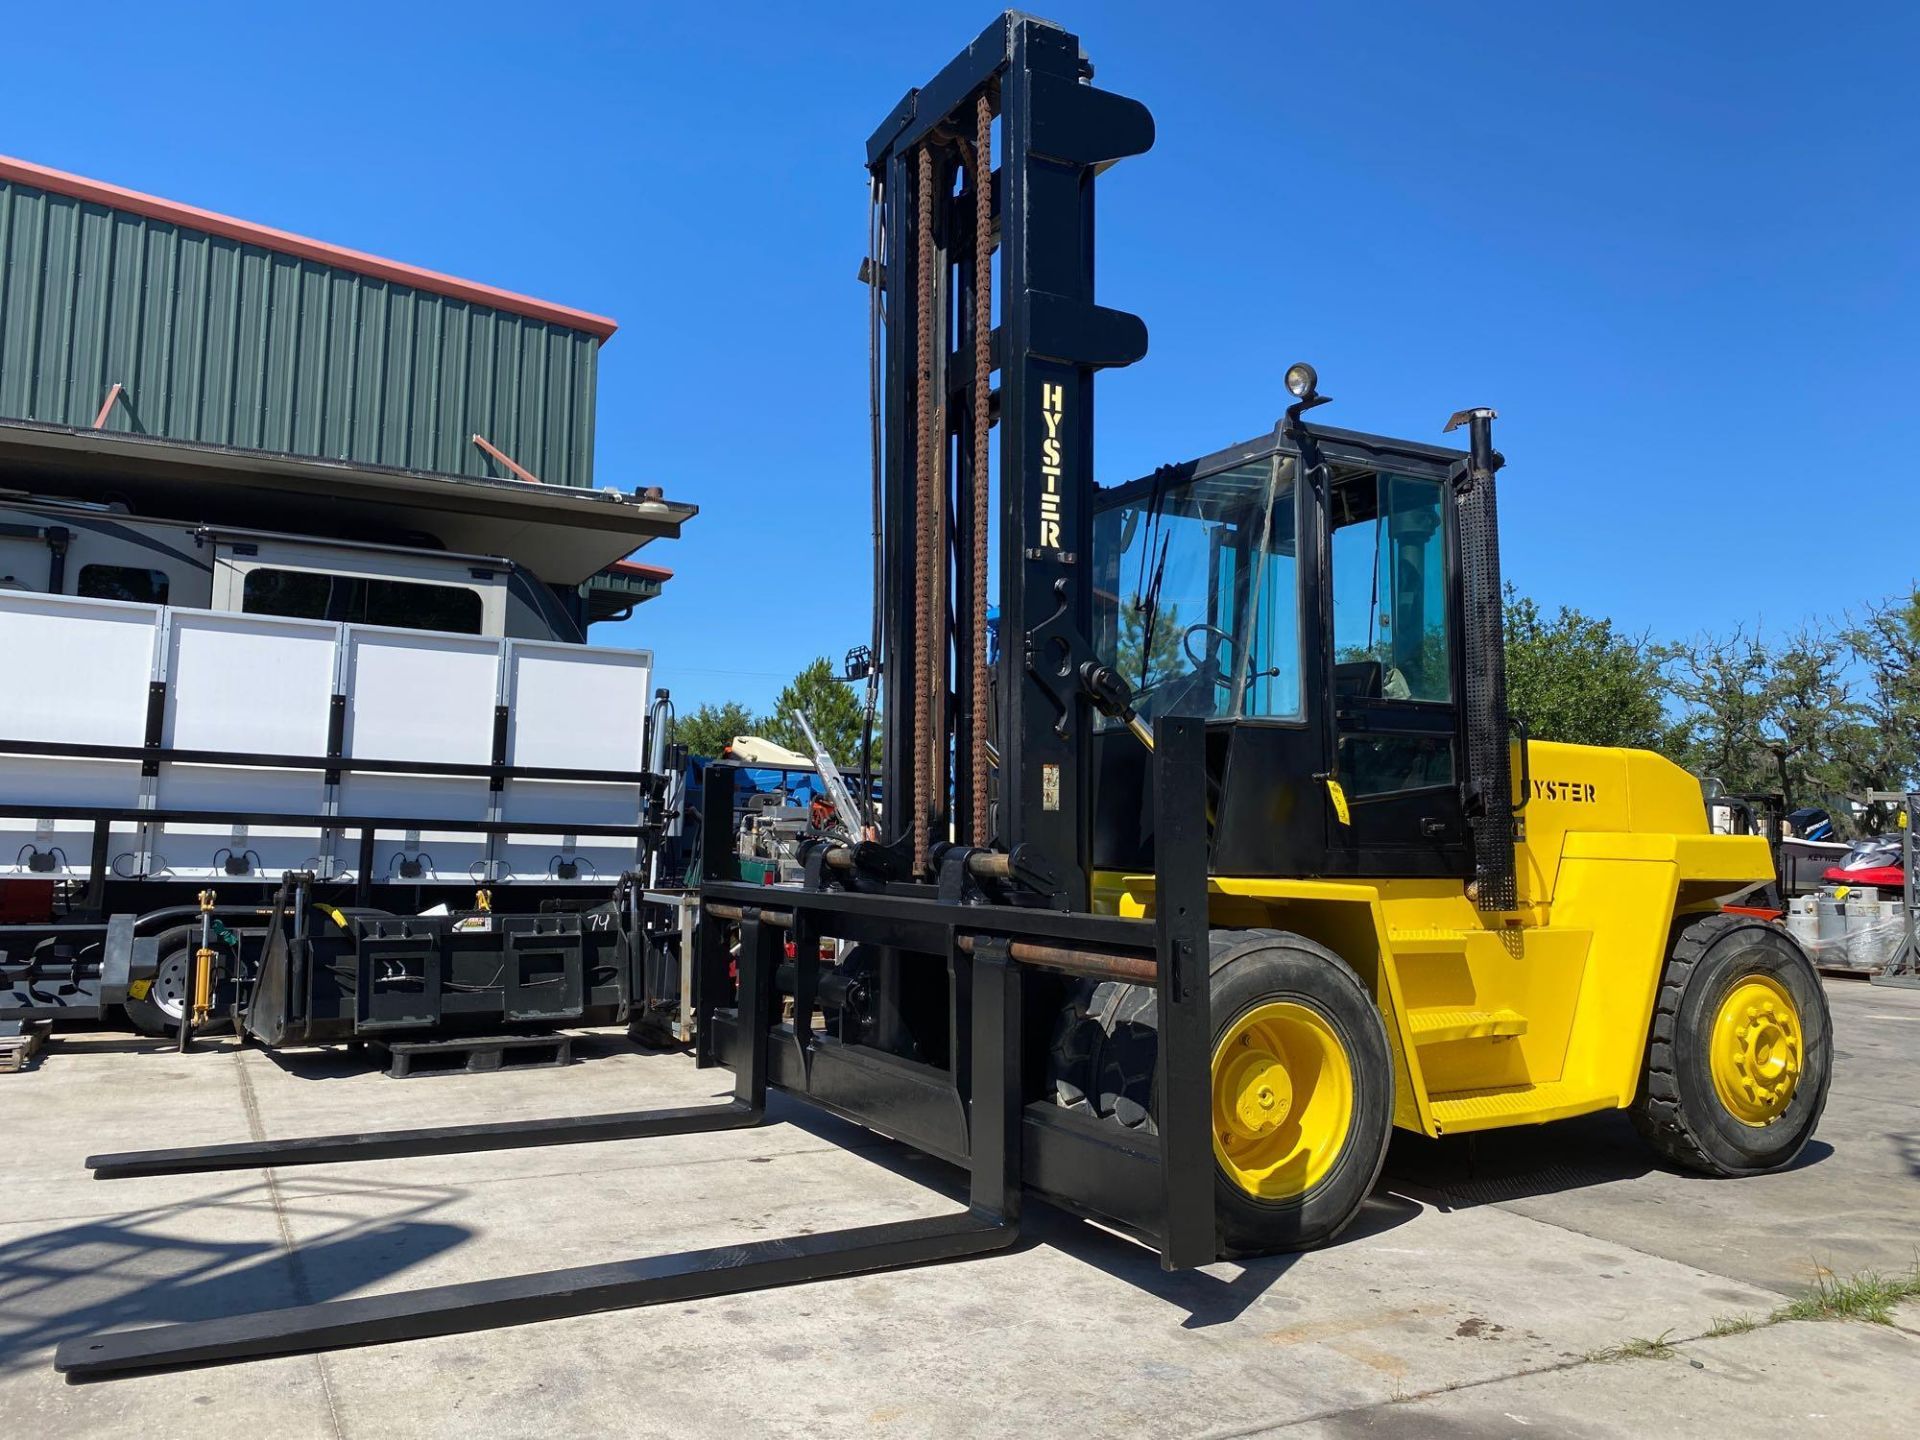 HYSTER DIESEL FORKLIFT MODEL H190XL2, APPROX. 19,000 LB CAPACITY, 212.6" HEIGHT CAPACITY, RUNS AND O